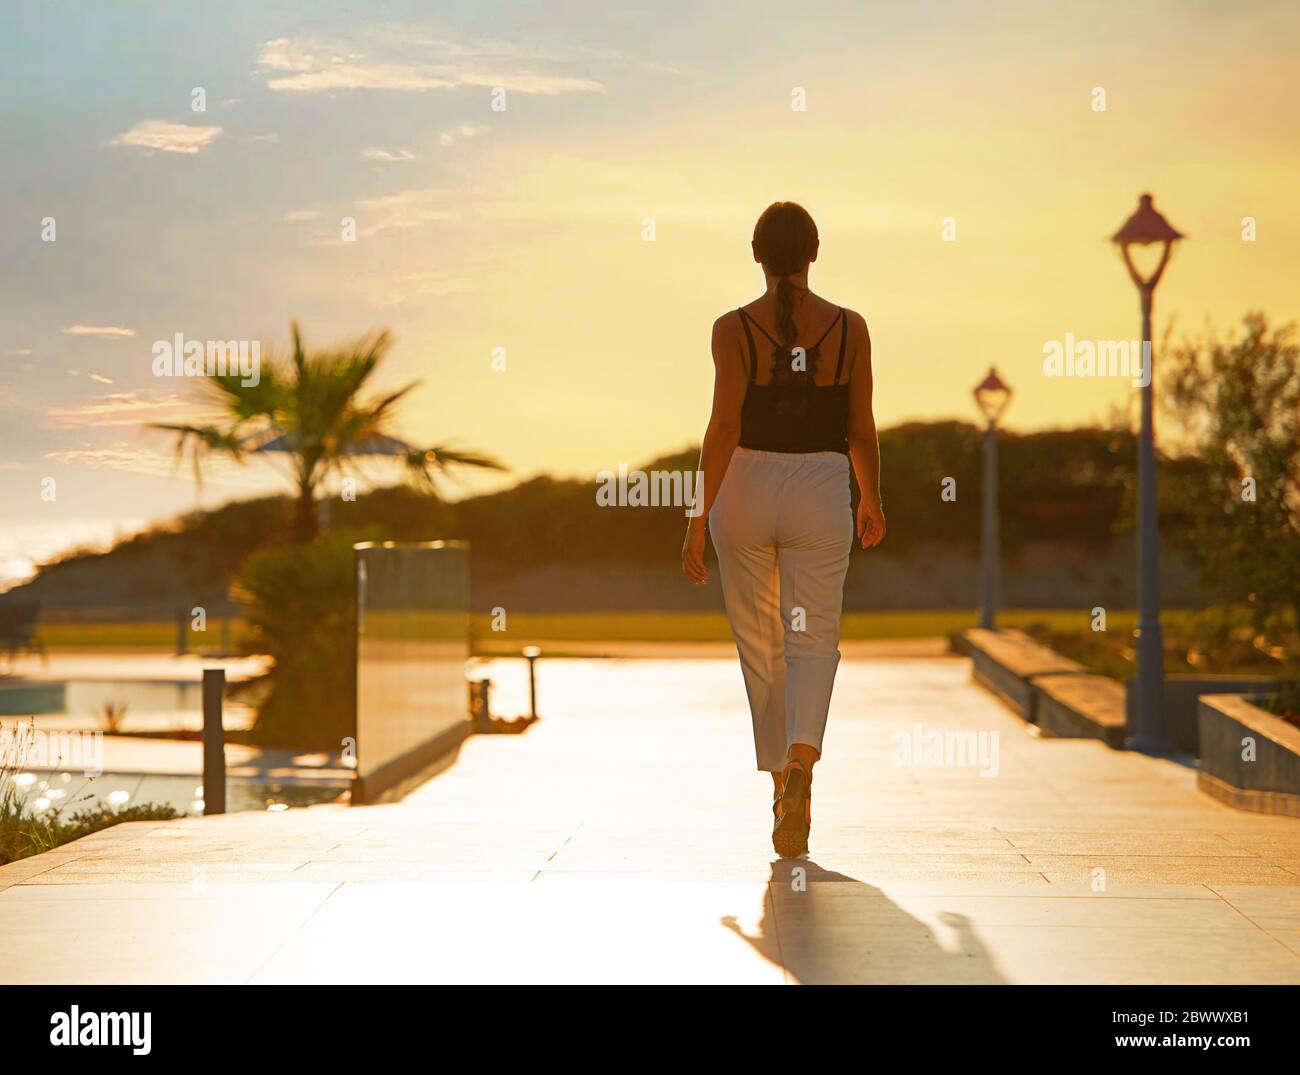 Back view of female silhouette going on evening sunset background of resort hotel. Woman walking by tropic street way with palms and mountain Stock Photo